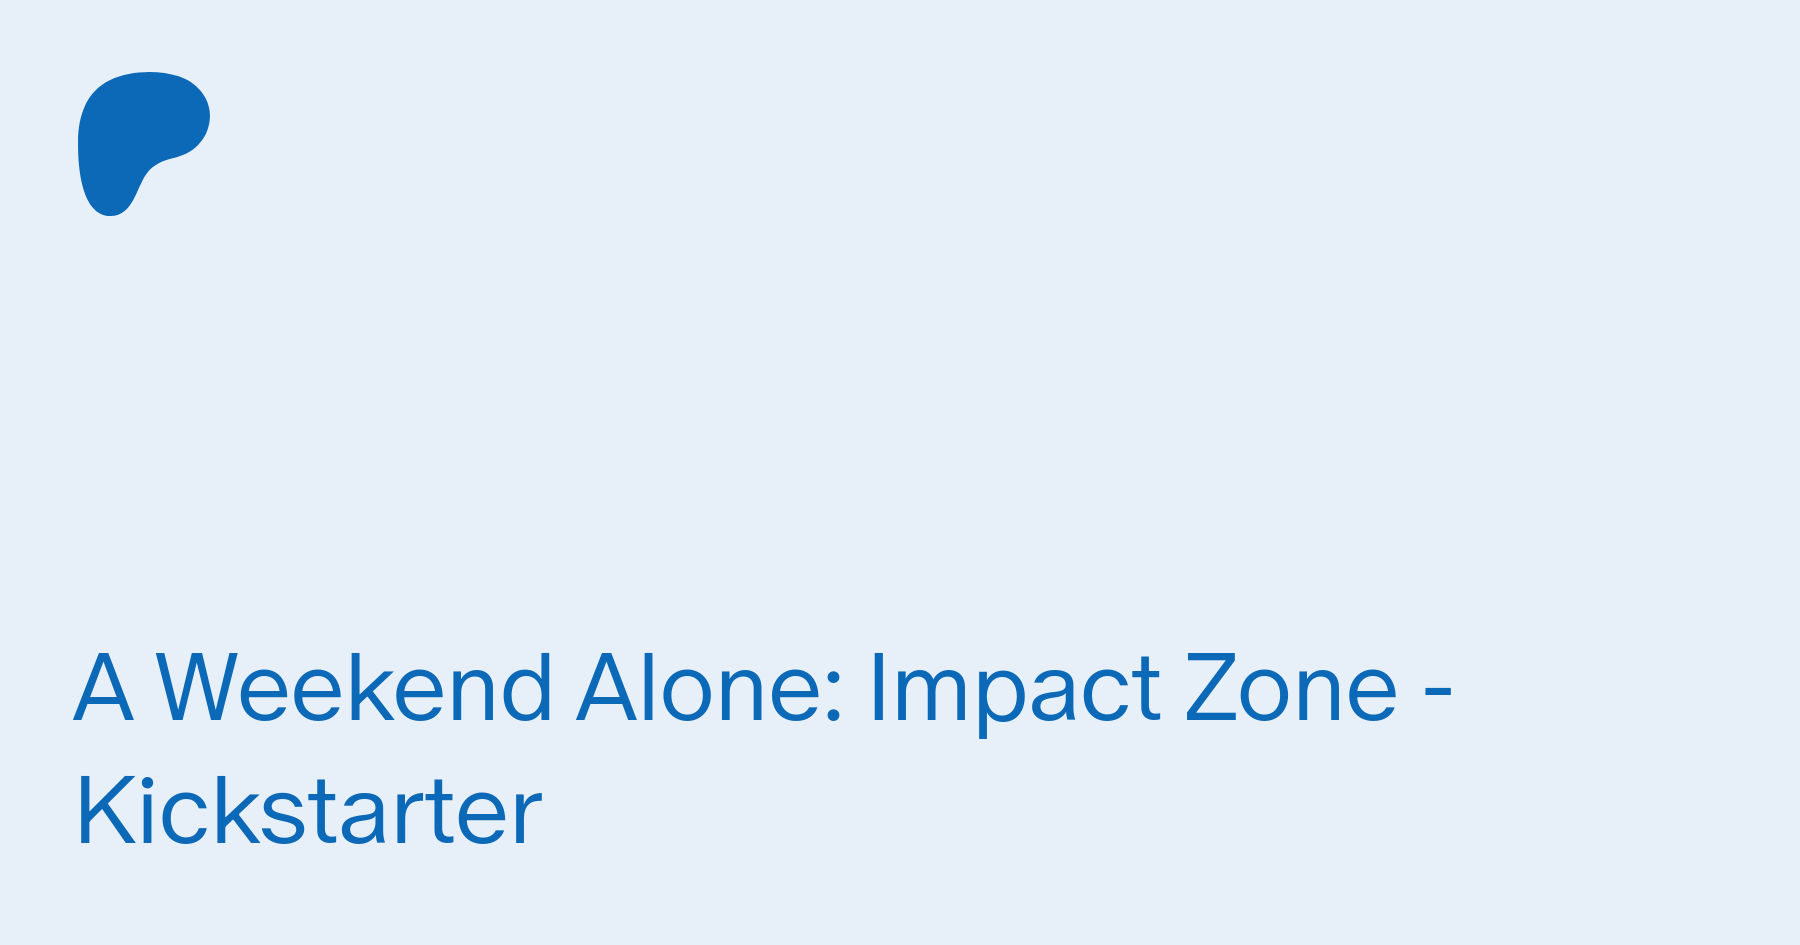 A weekend alone impact zone